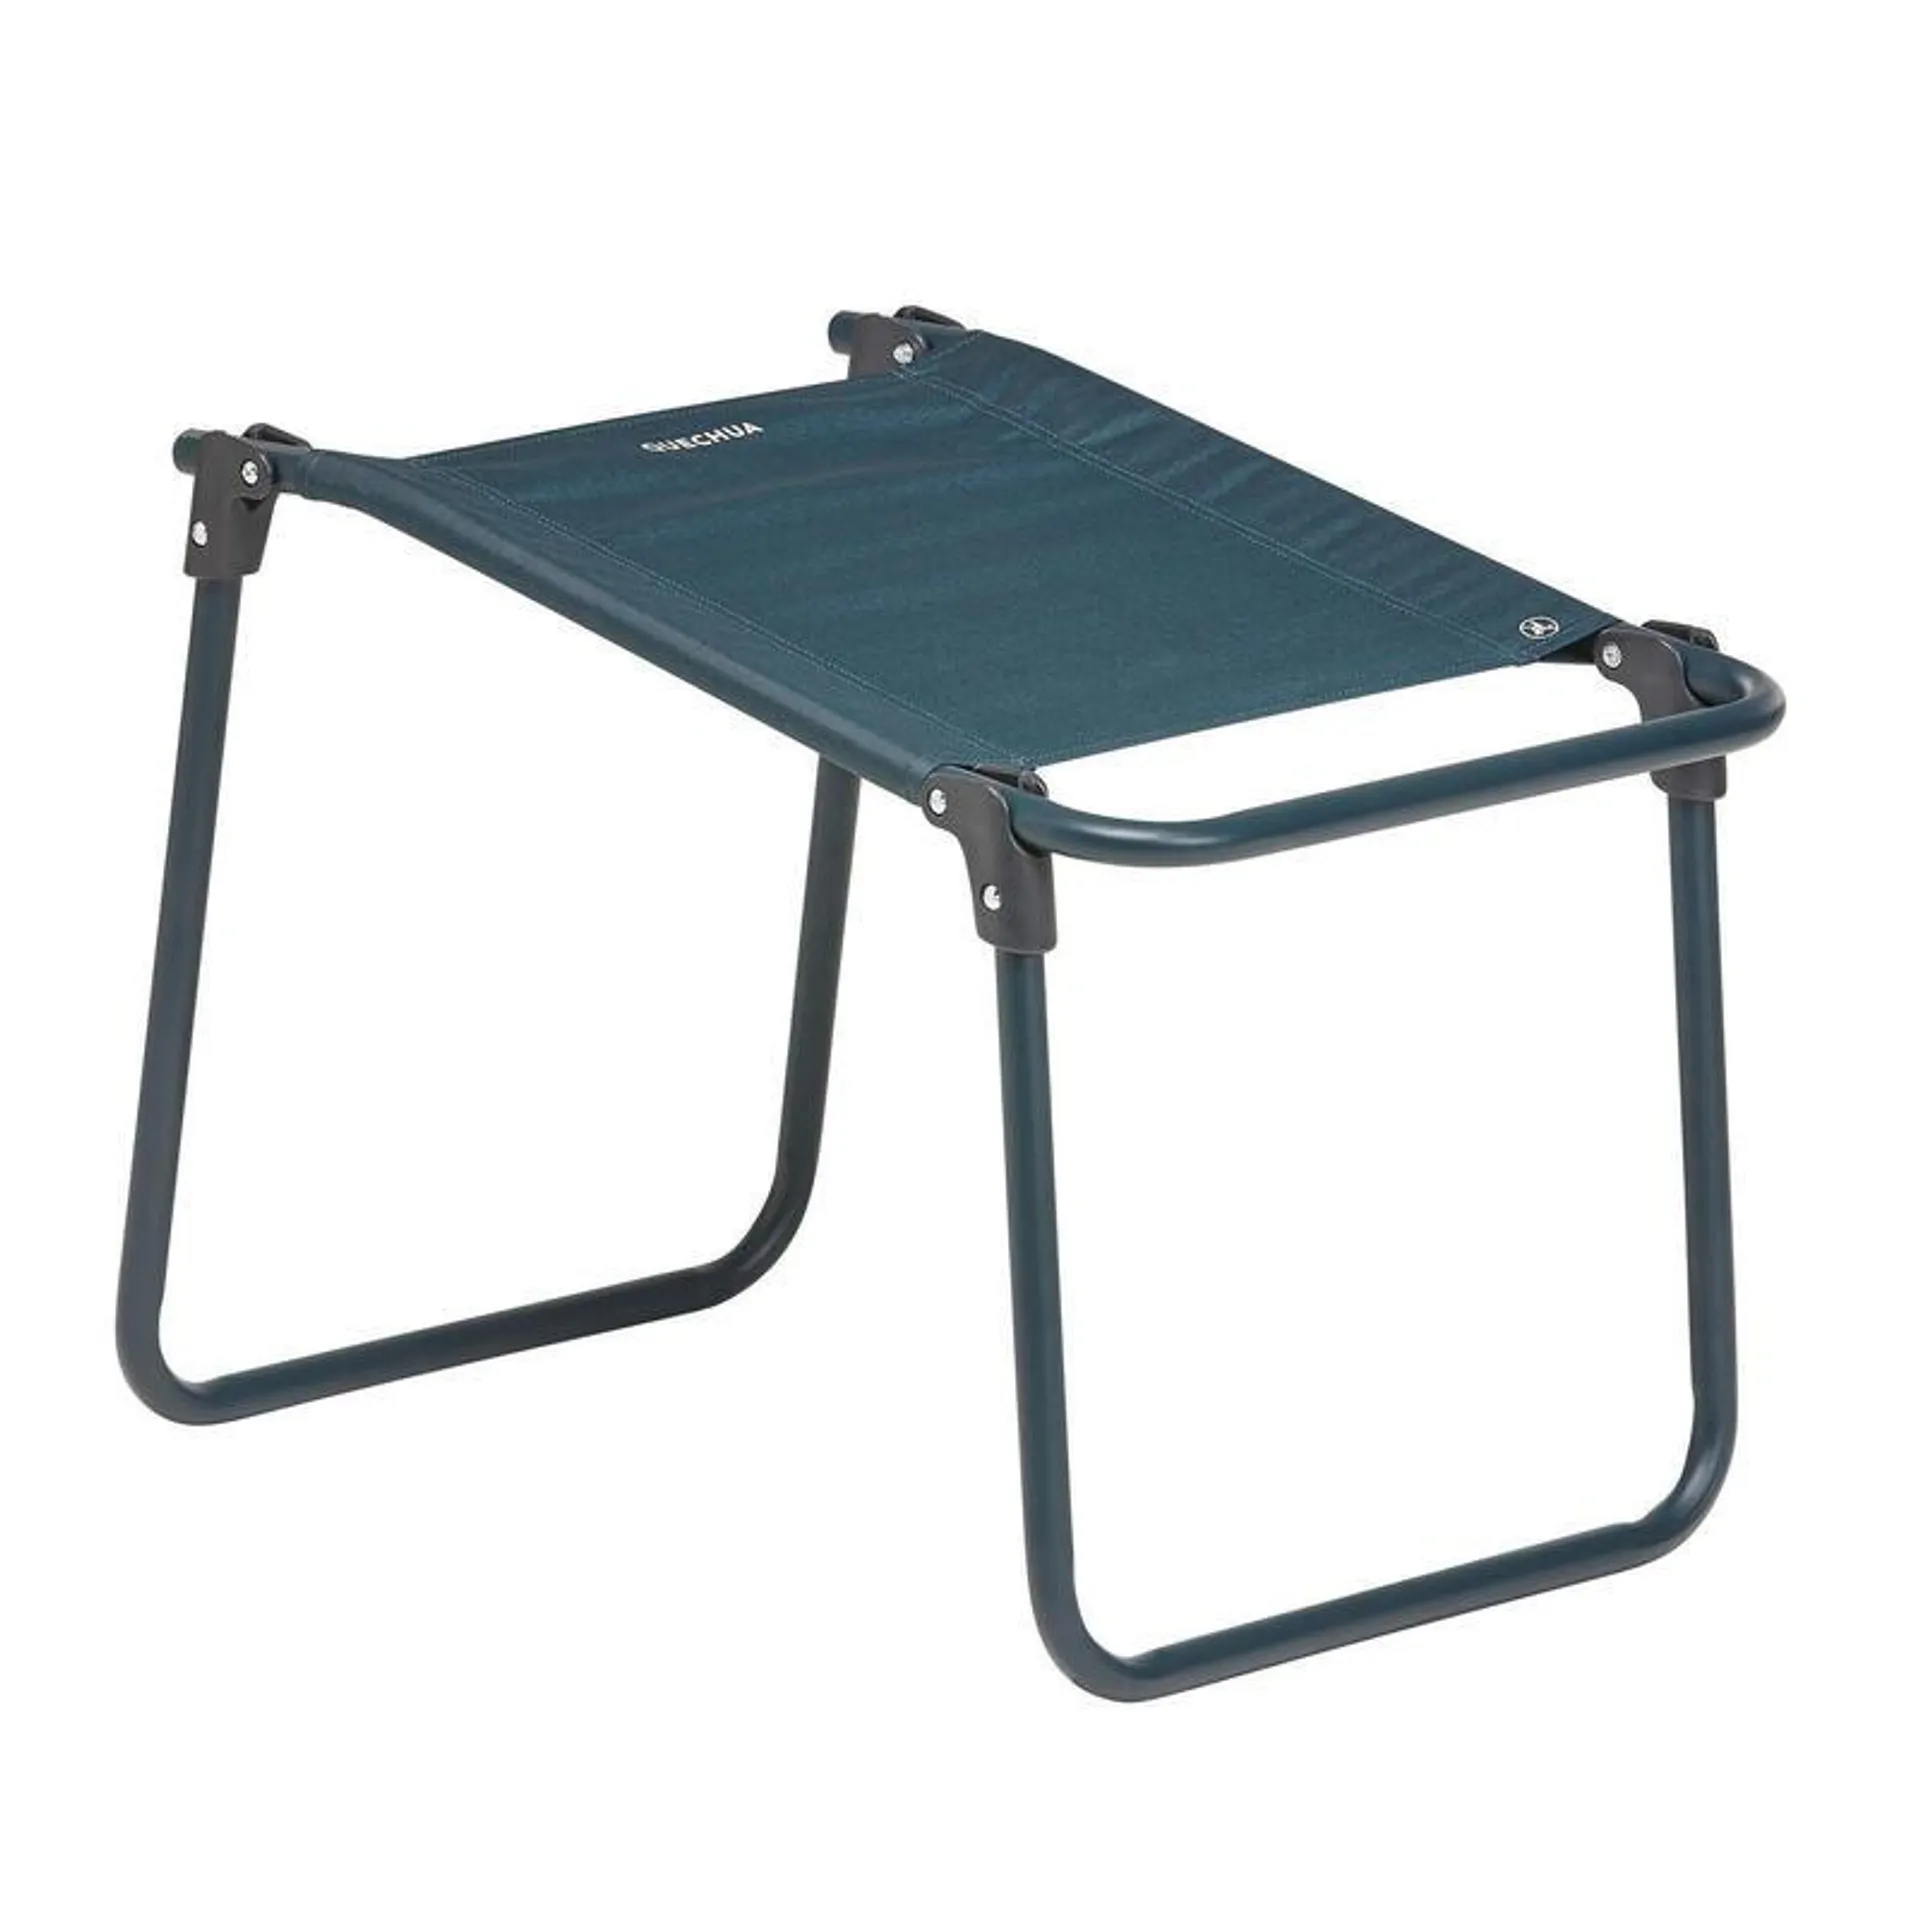 LOW FOLDING CAMPING CHAIR MH100 Blue